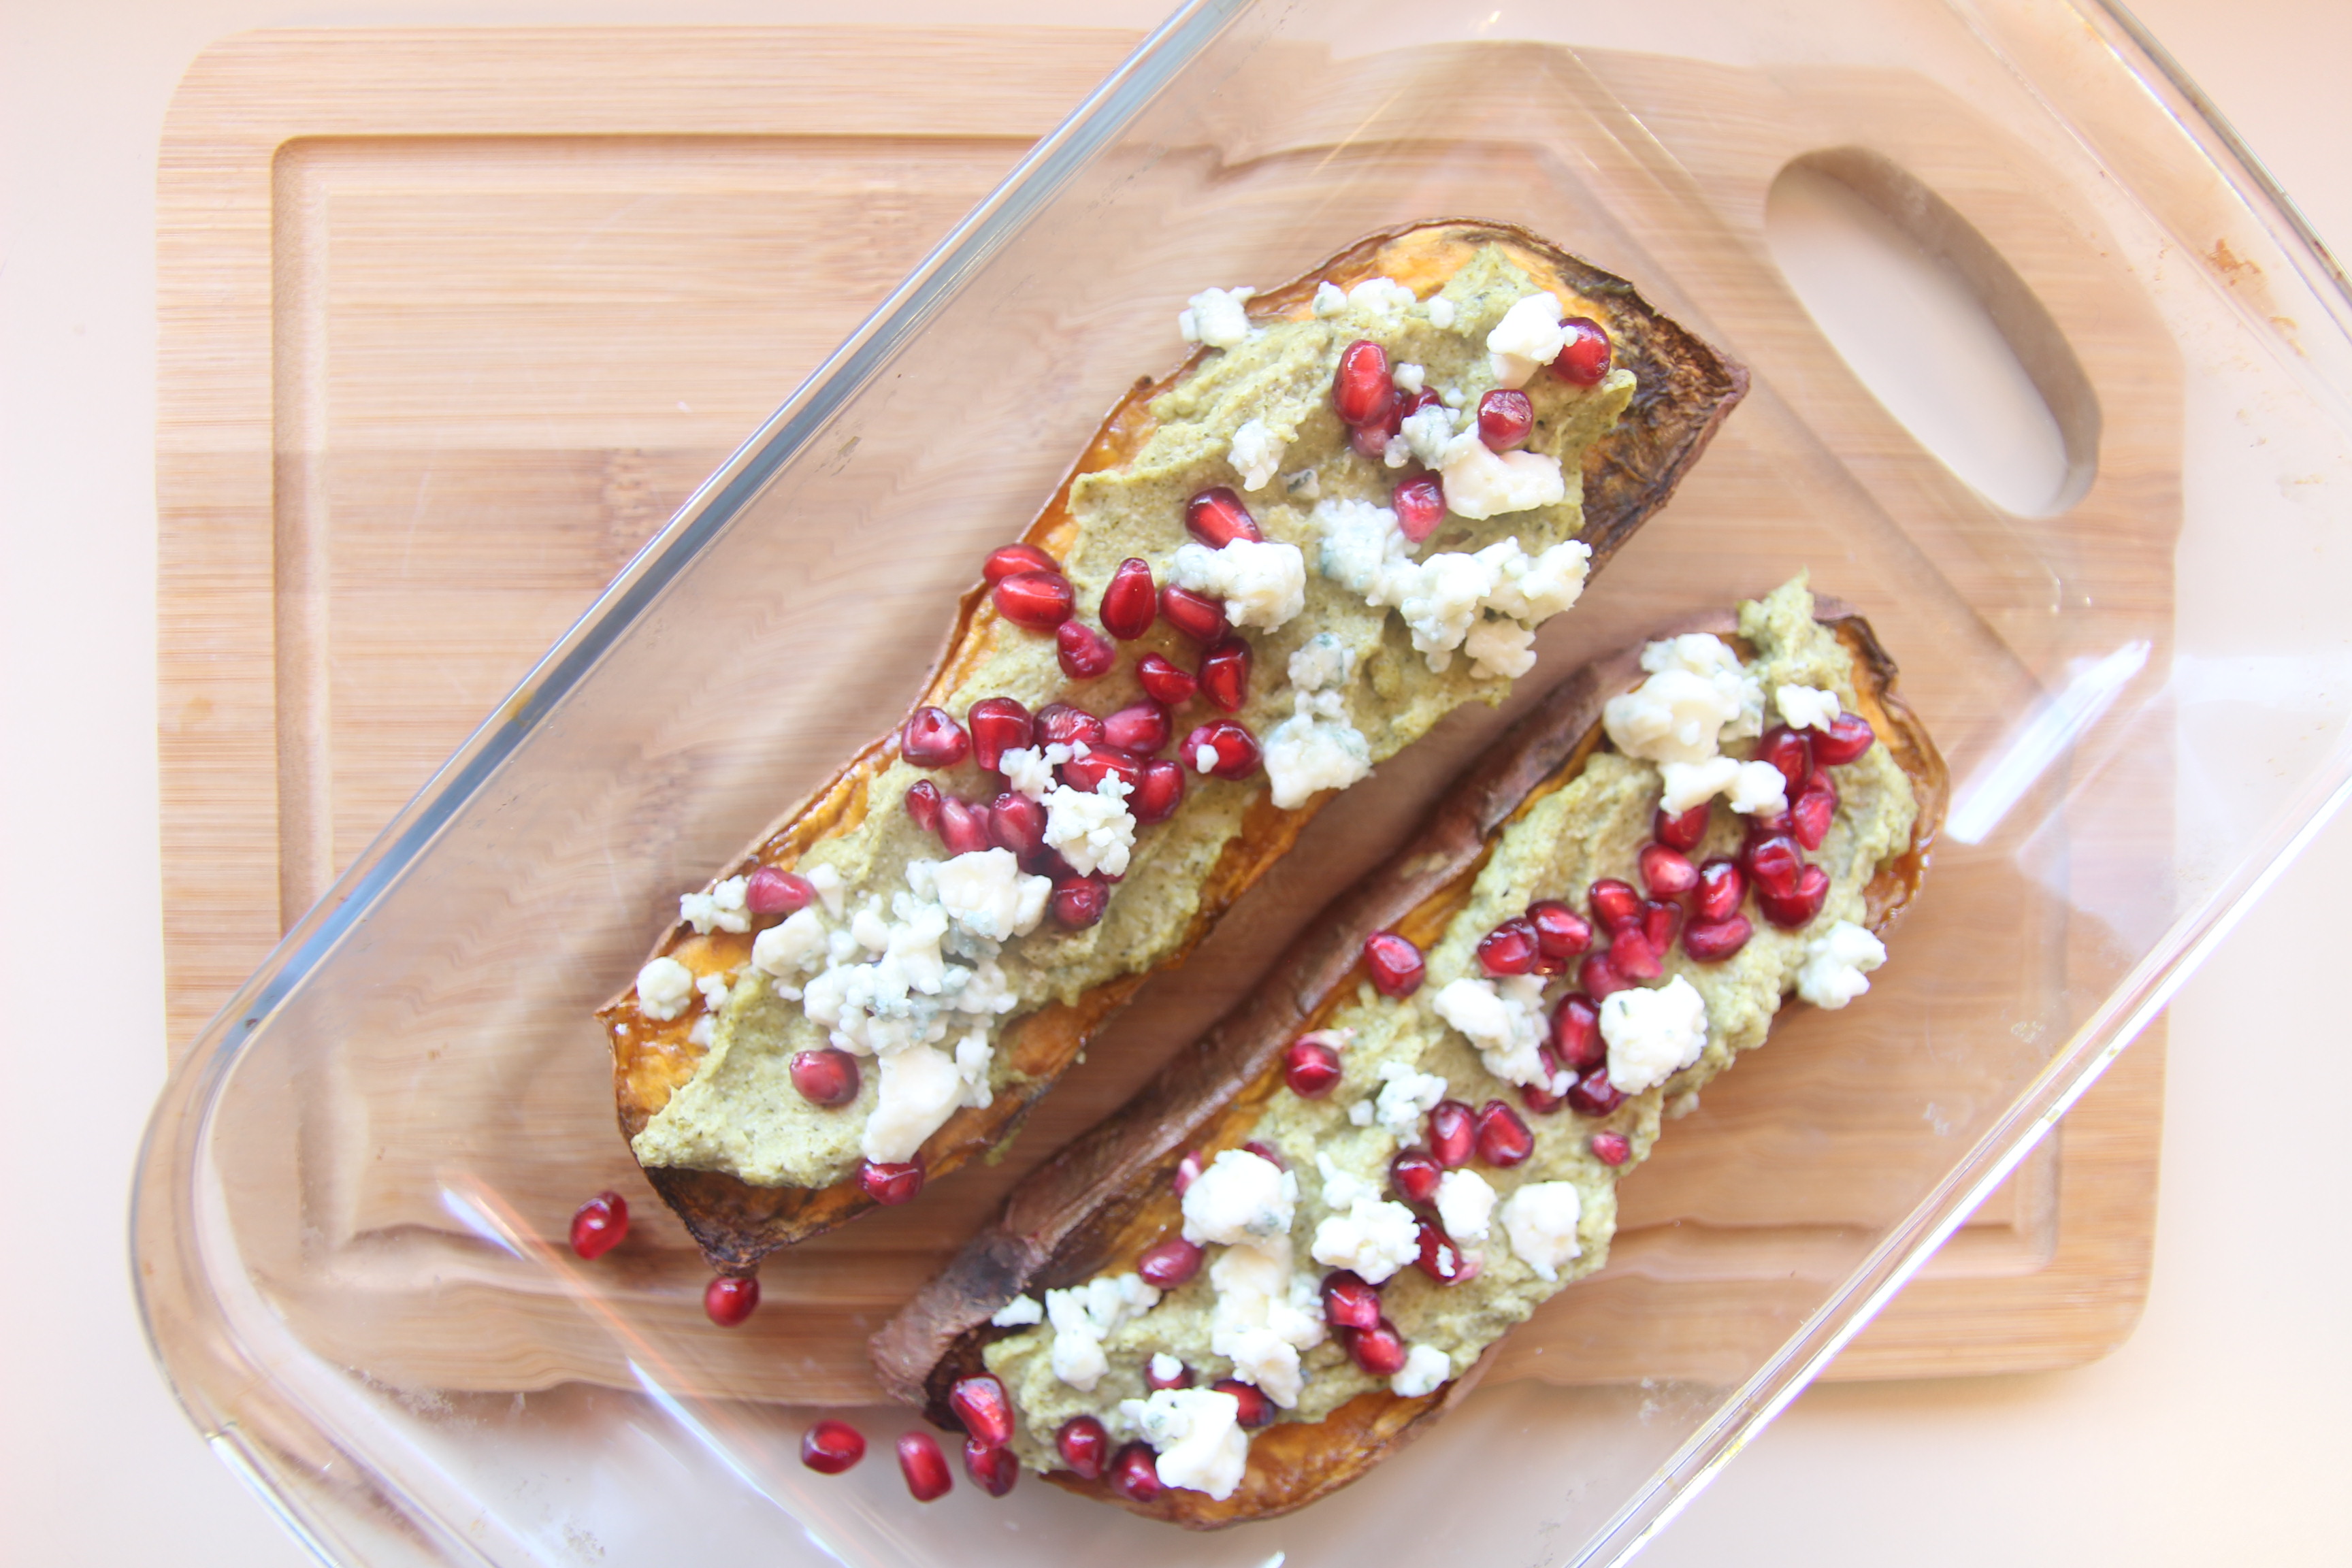 SWEET POTATOES WITH BROCCOLI PESTO, BLUE CHEESE AND POMEGRANATE SEEDS